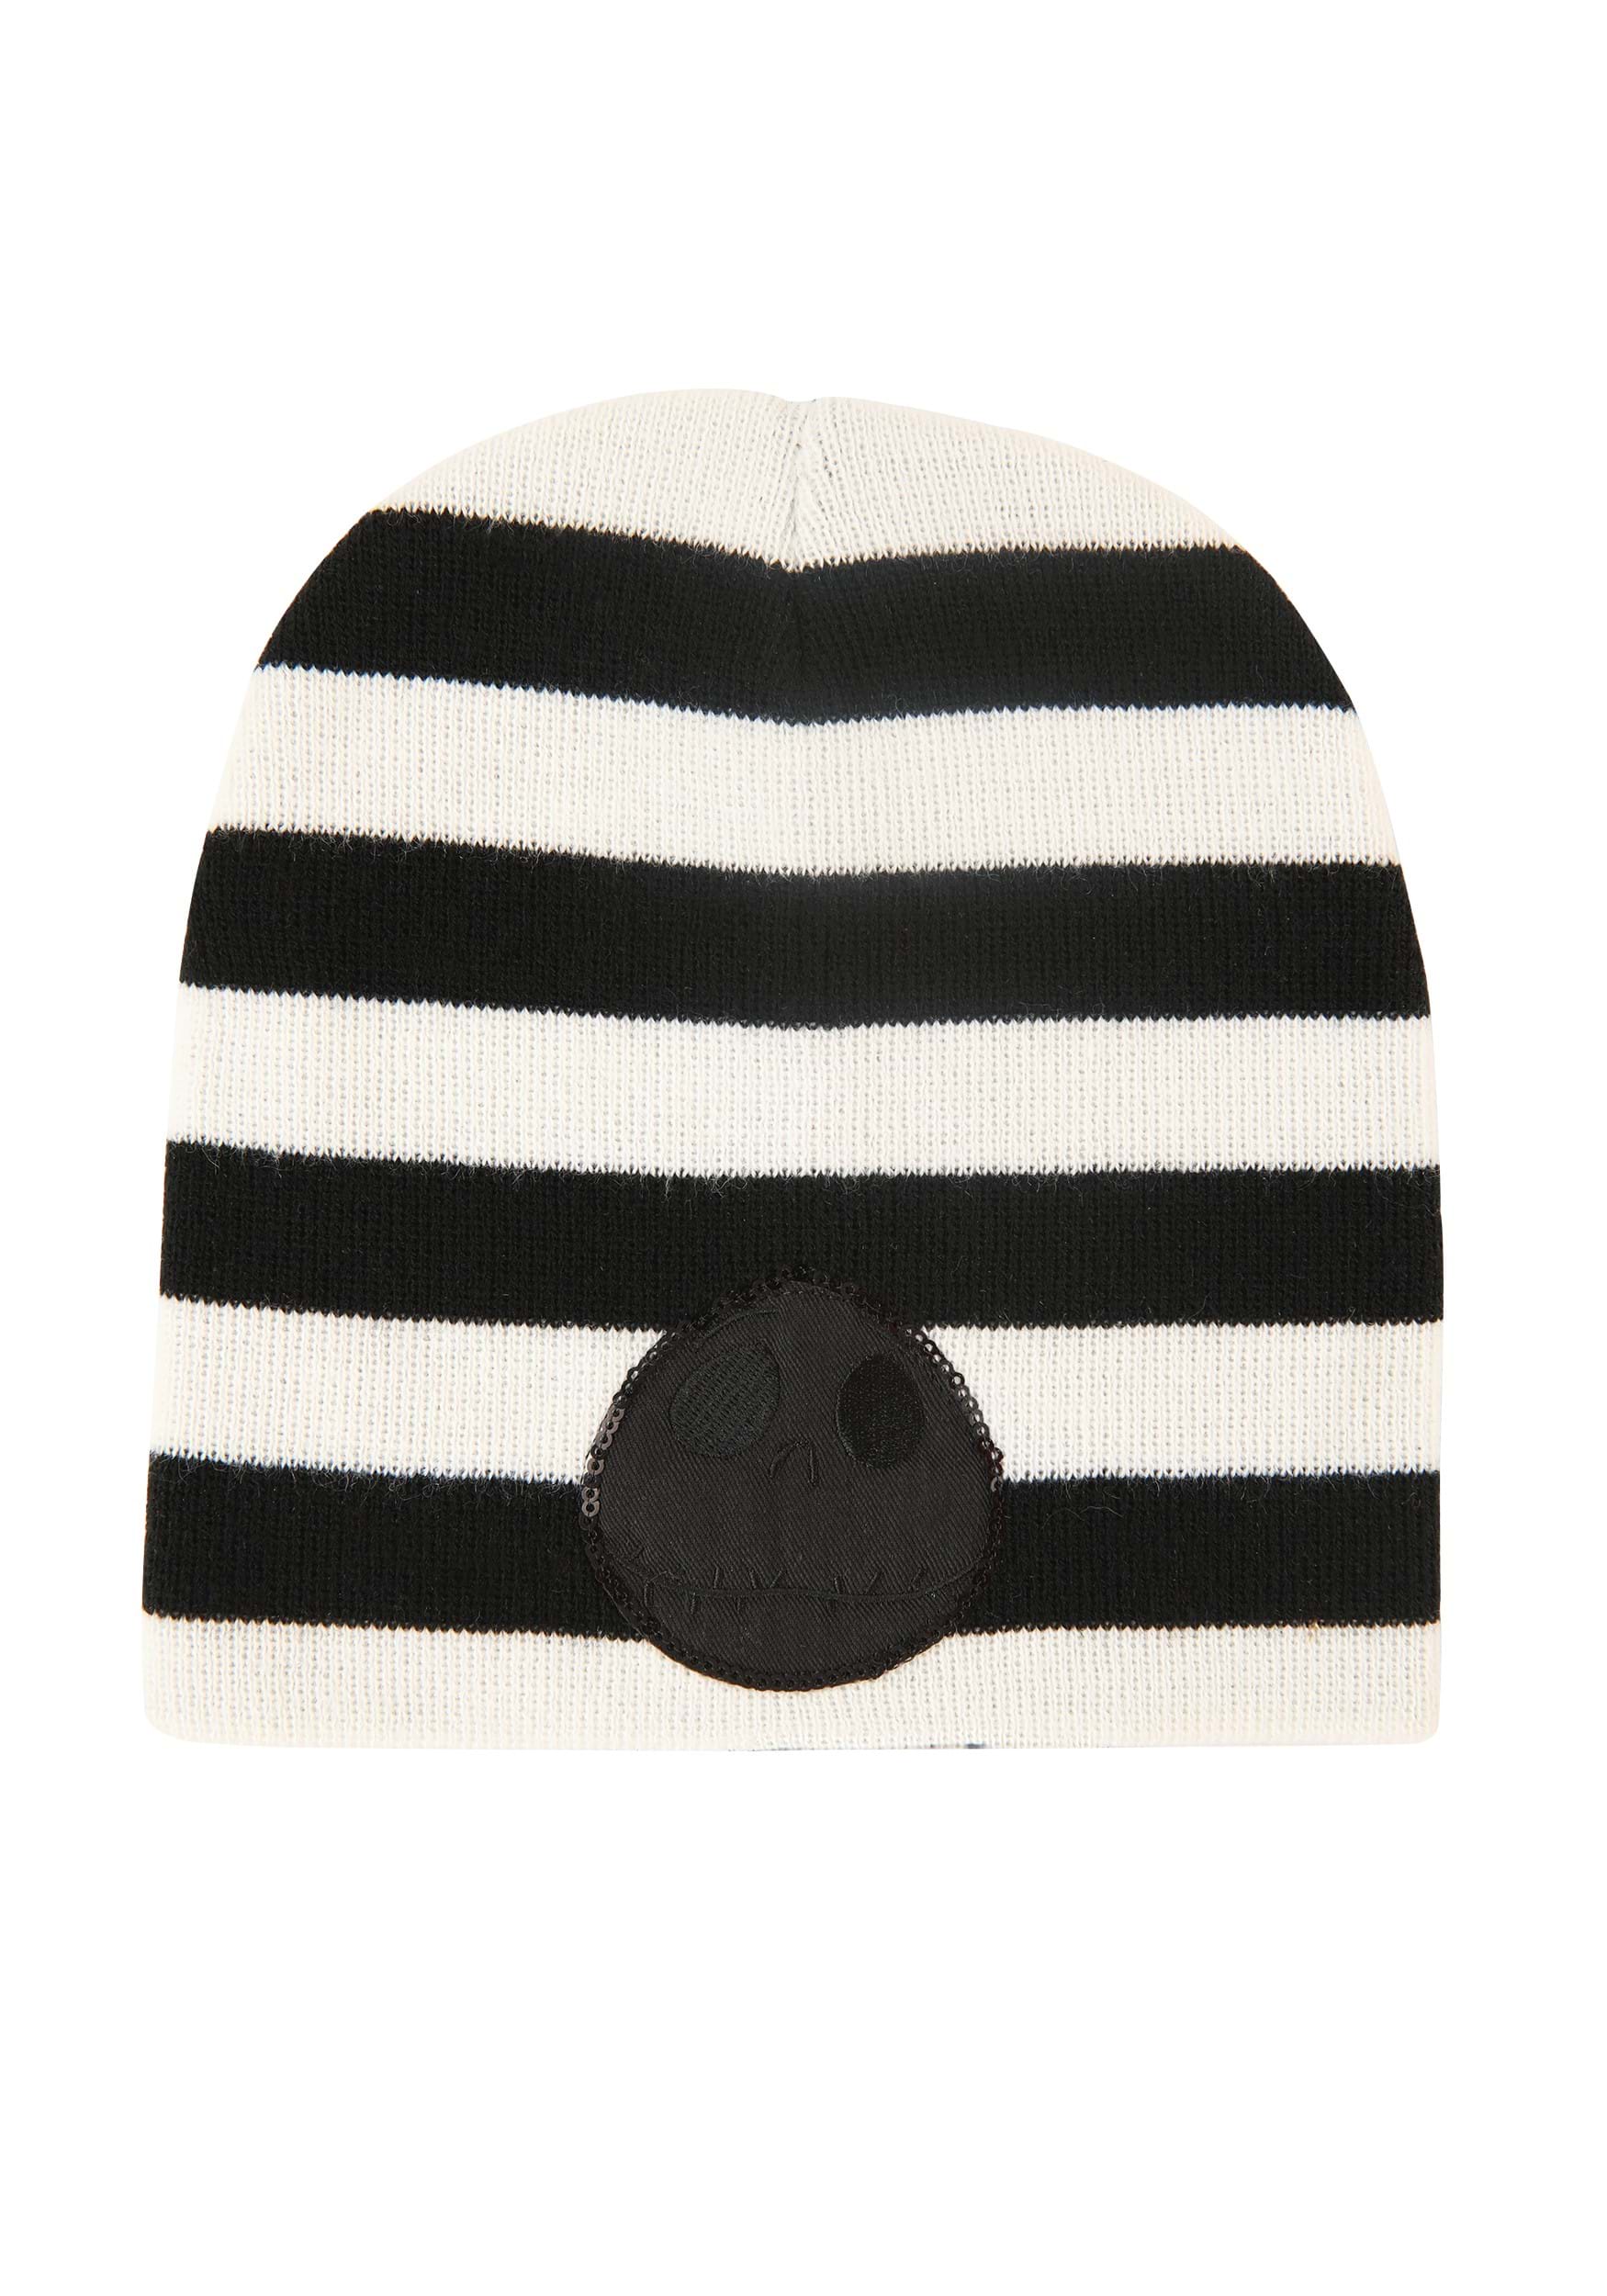 Nightmare Before Christmas Sequin Striped Adult Knit Hat